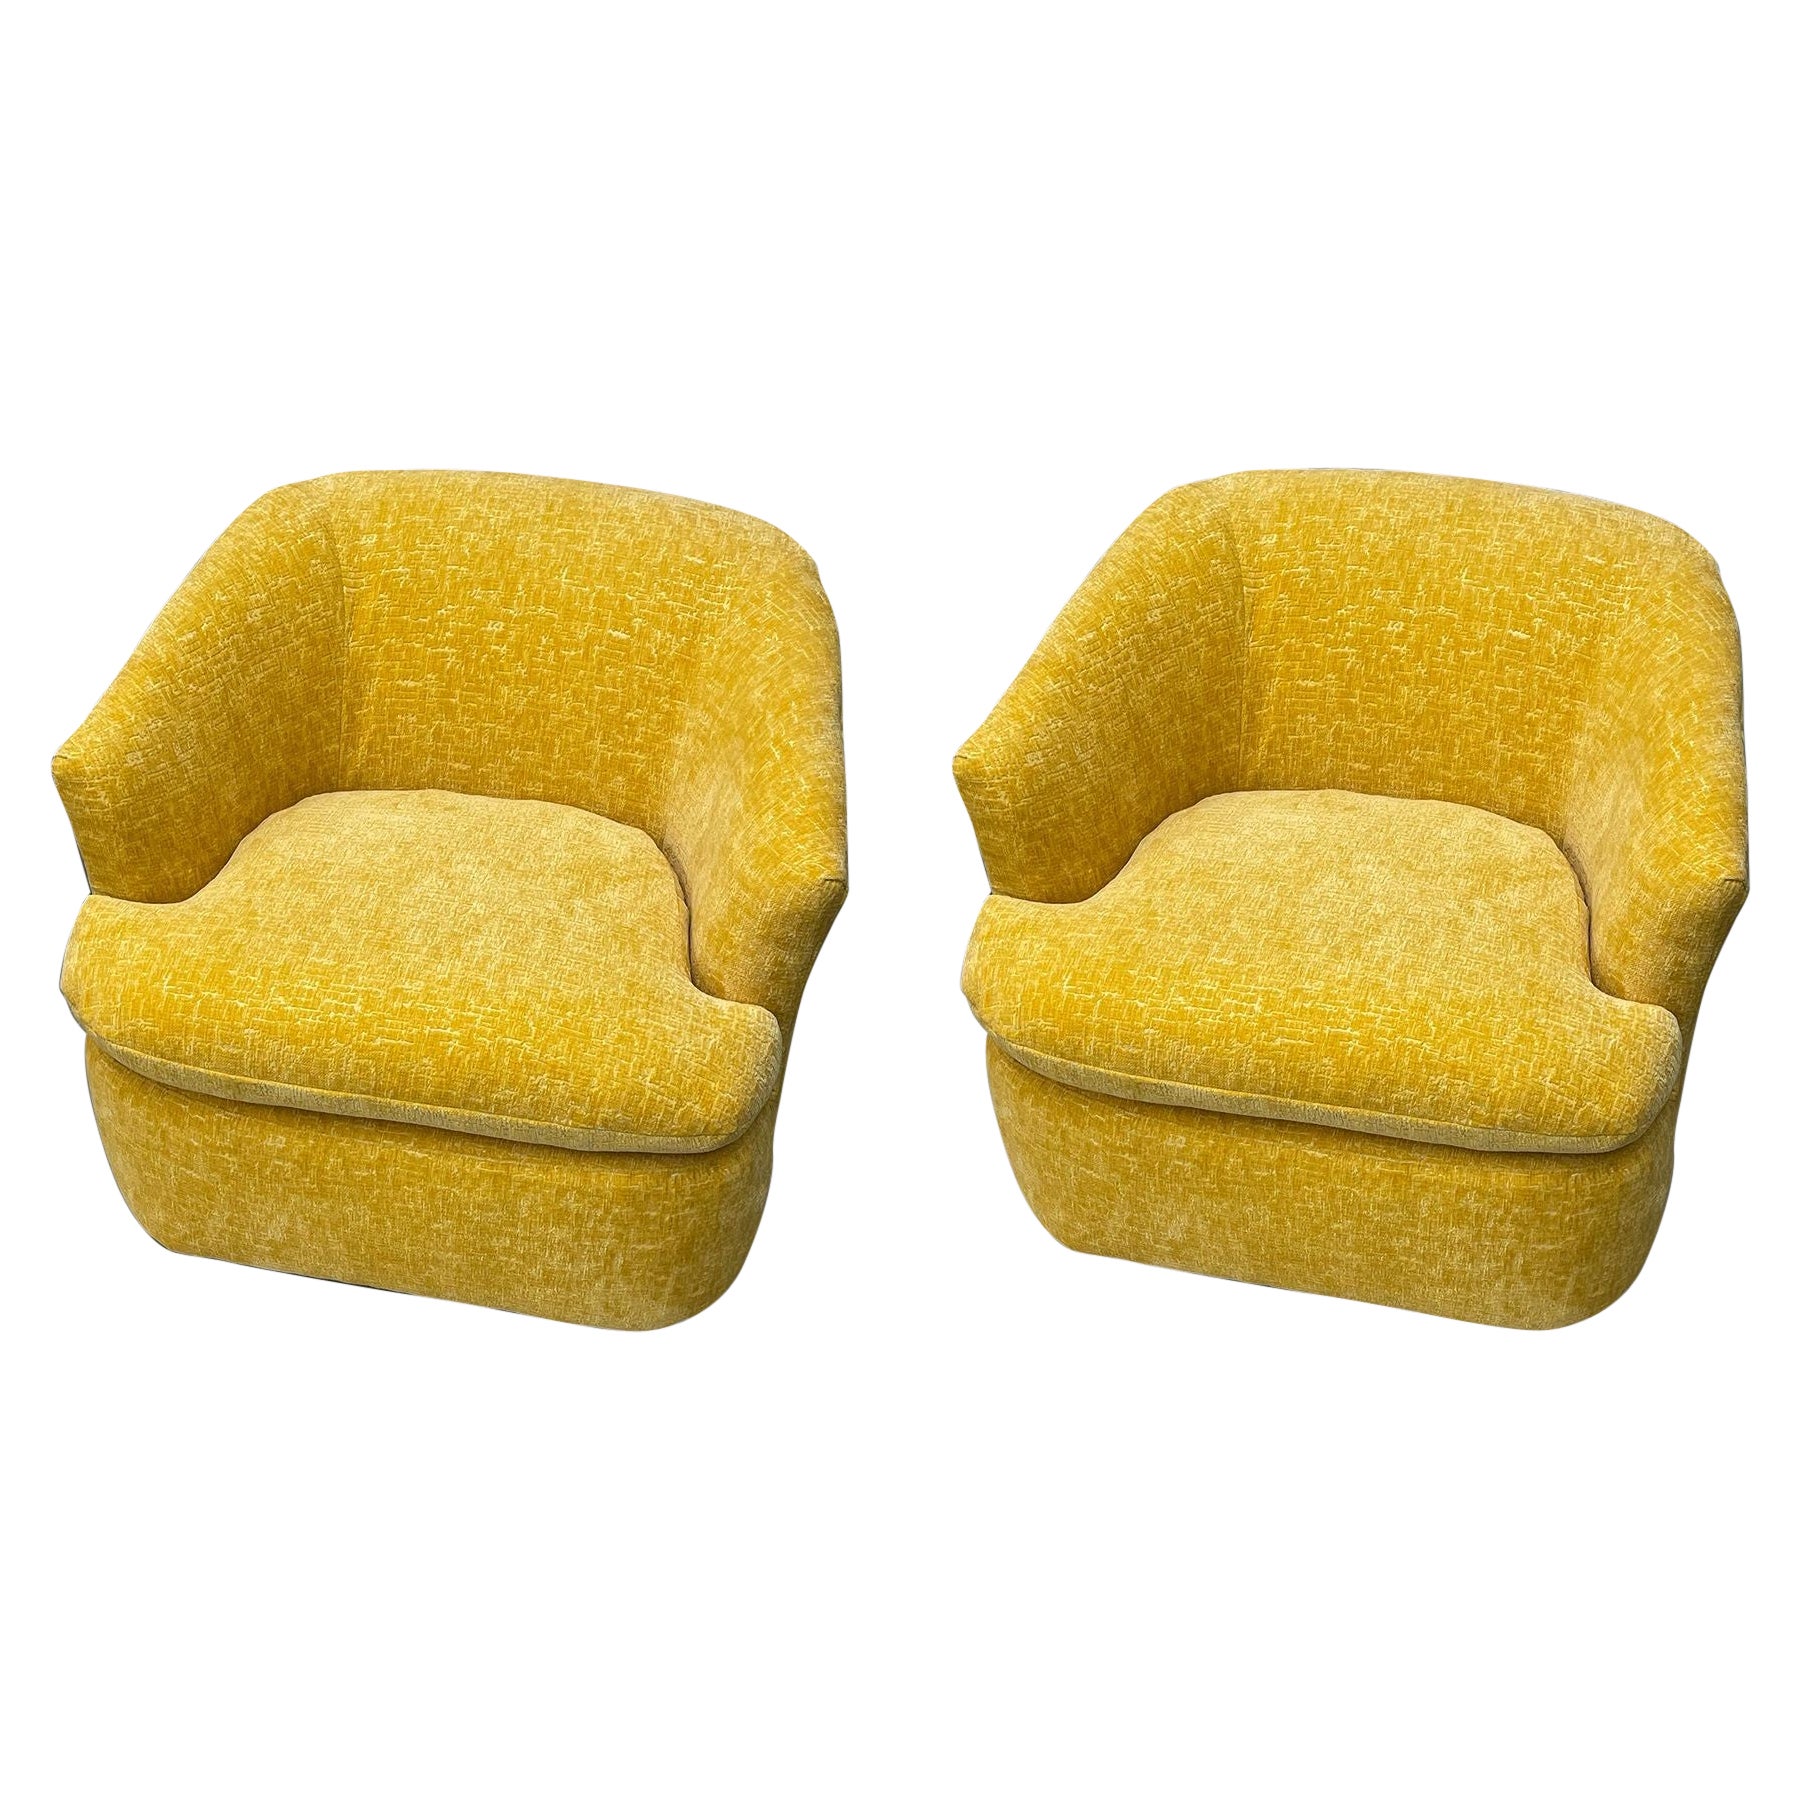 Pair of Milo Baughman Style Swivel / Tub Chairs, New Yellow Textured Upholstery